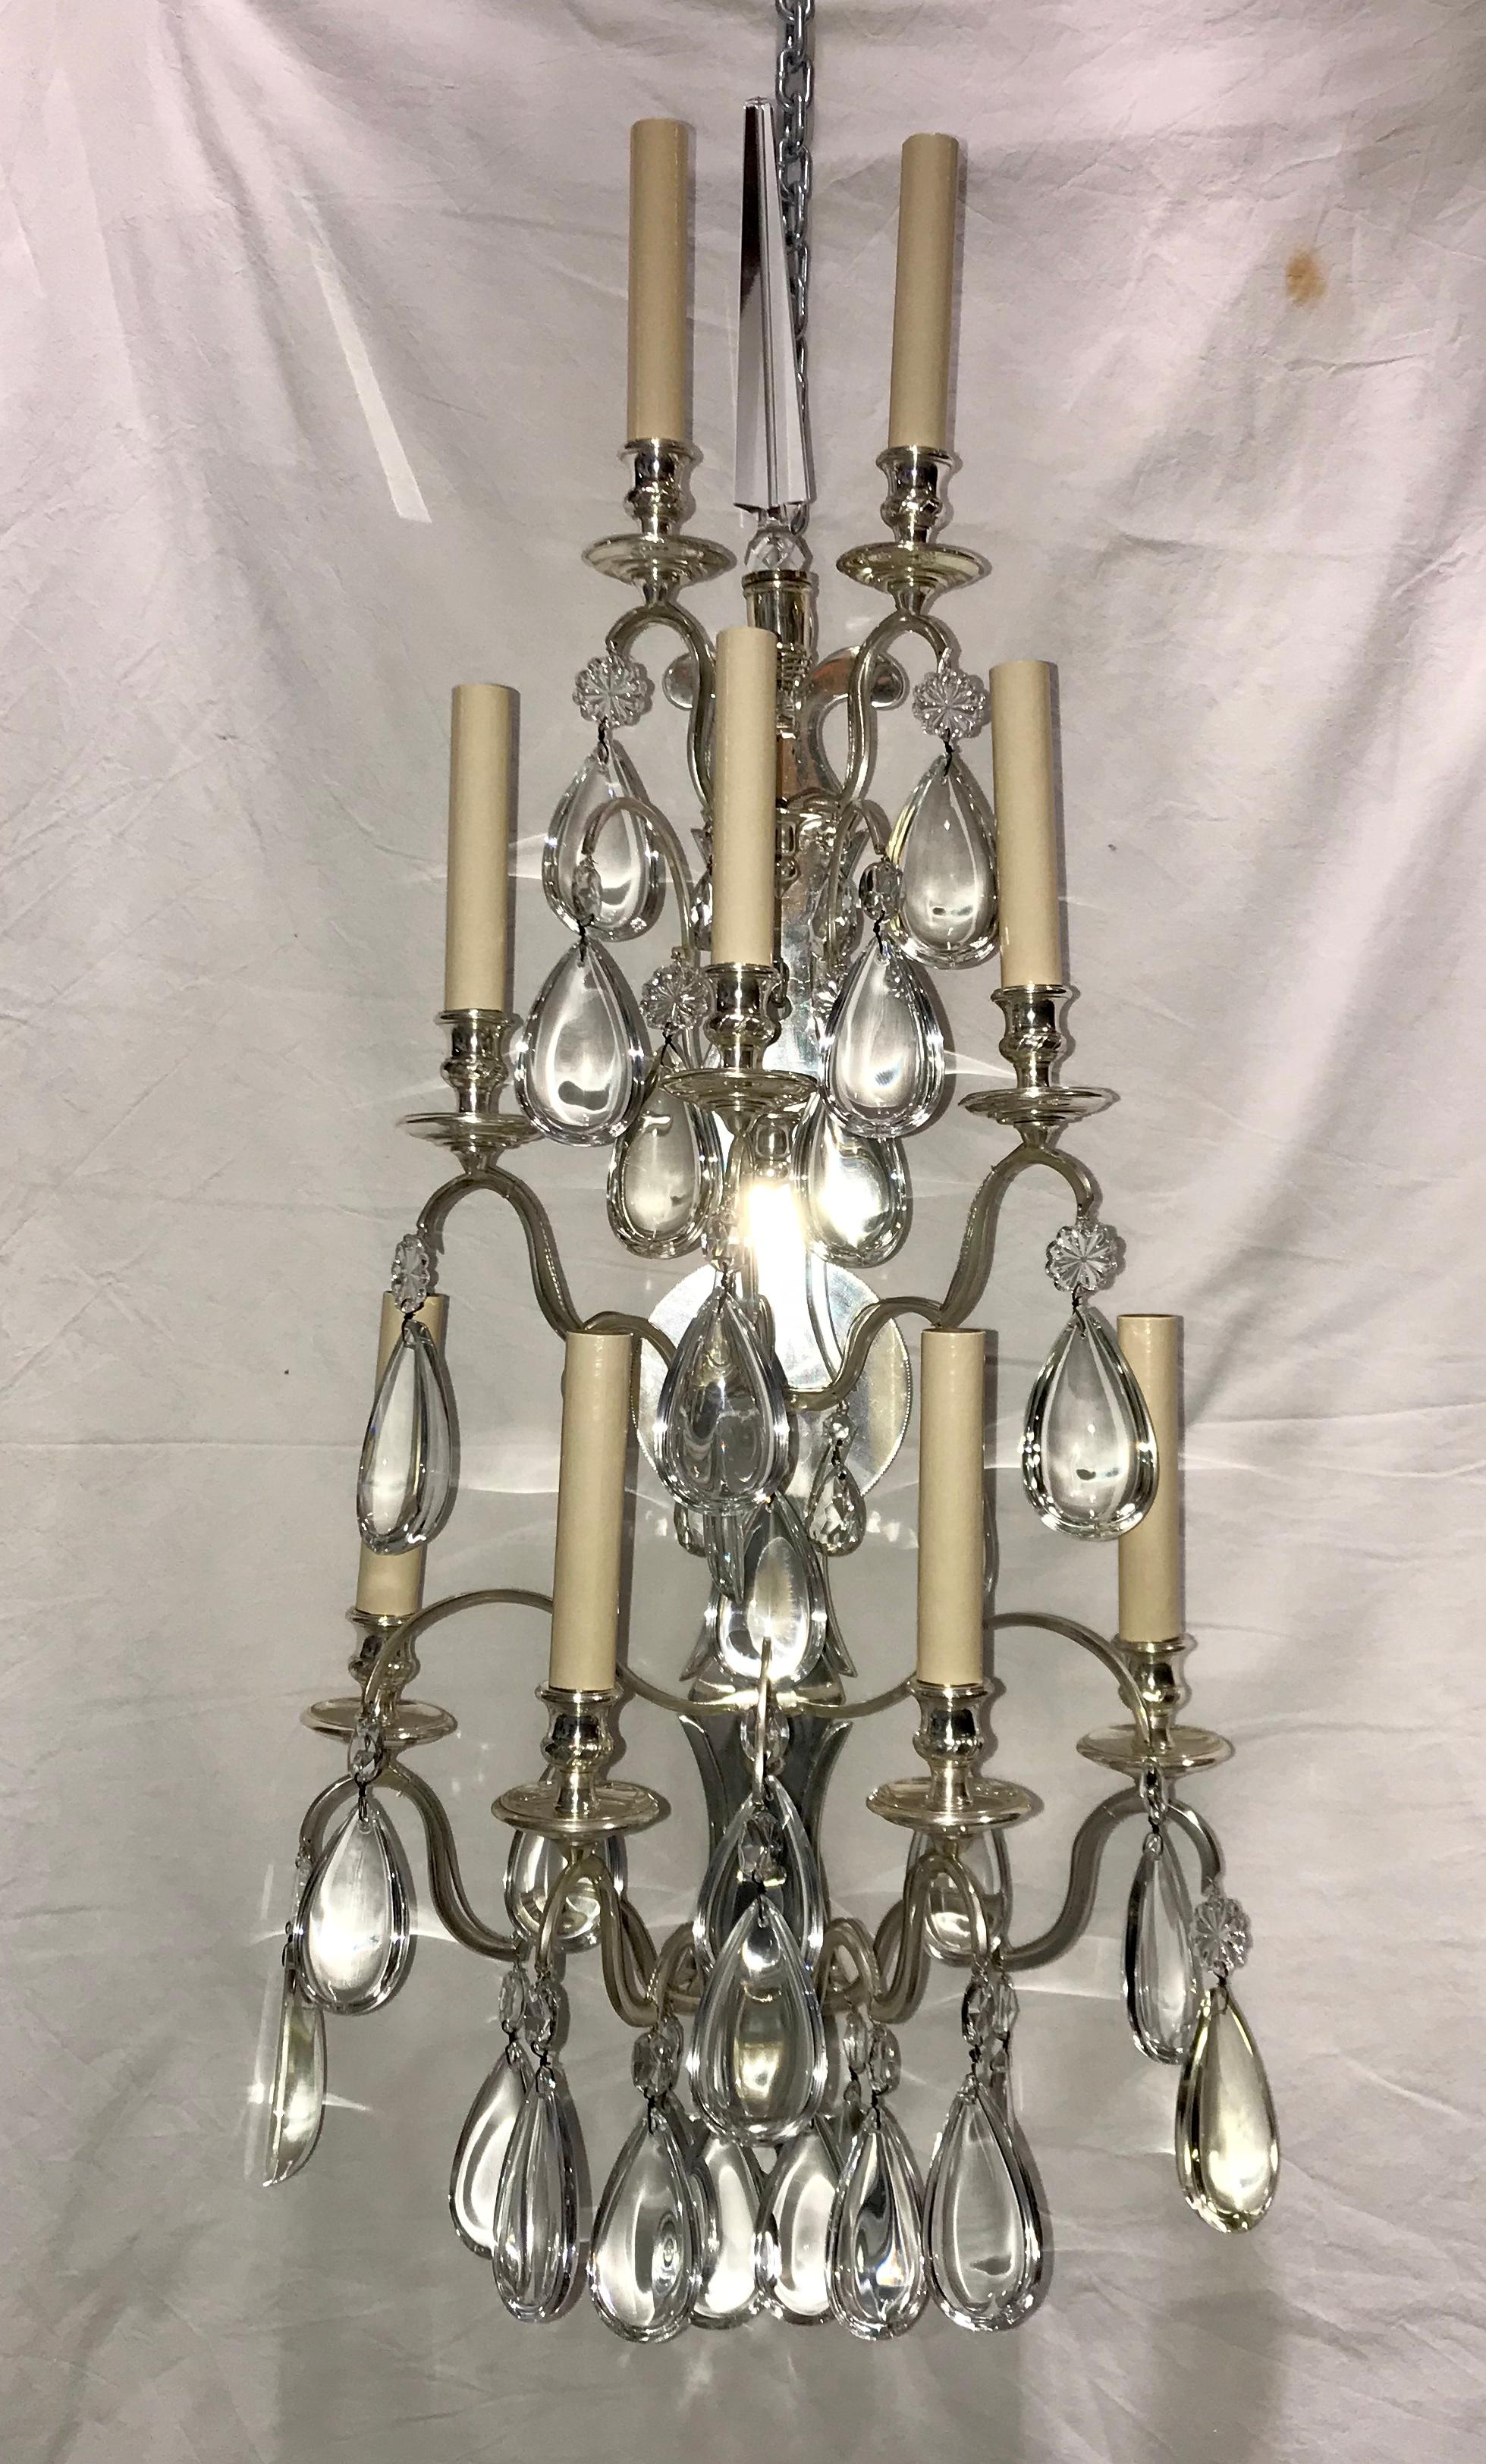 A set of four large French circa 1920's French bronze sconces with crystal drops and nine lights each. Sold per pair.

Measurements:
Height: 38